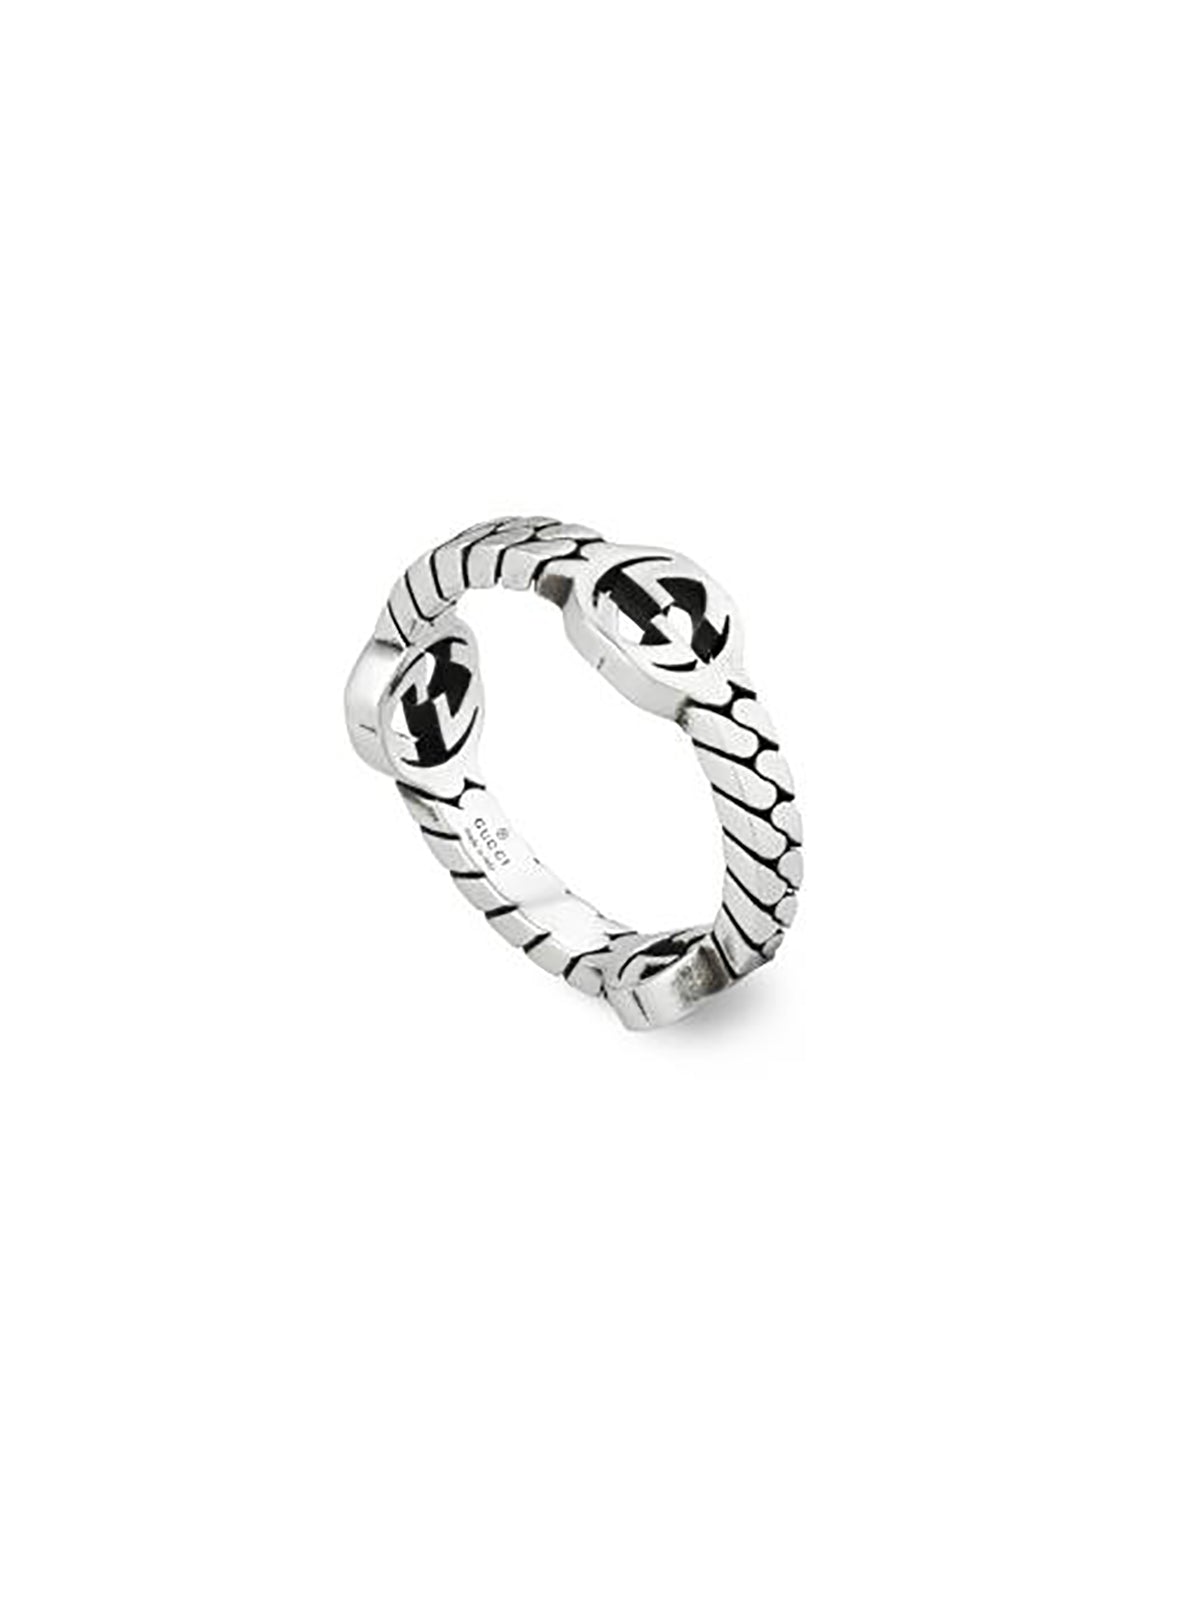 Gucci Interlocking G Ring 5.5mm in Silver - Size 19